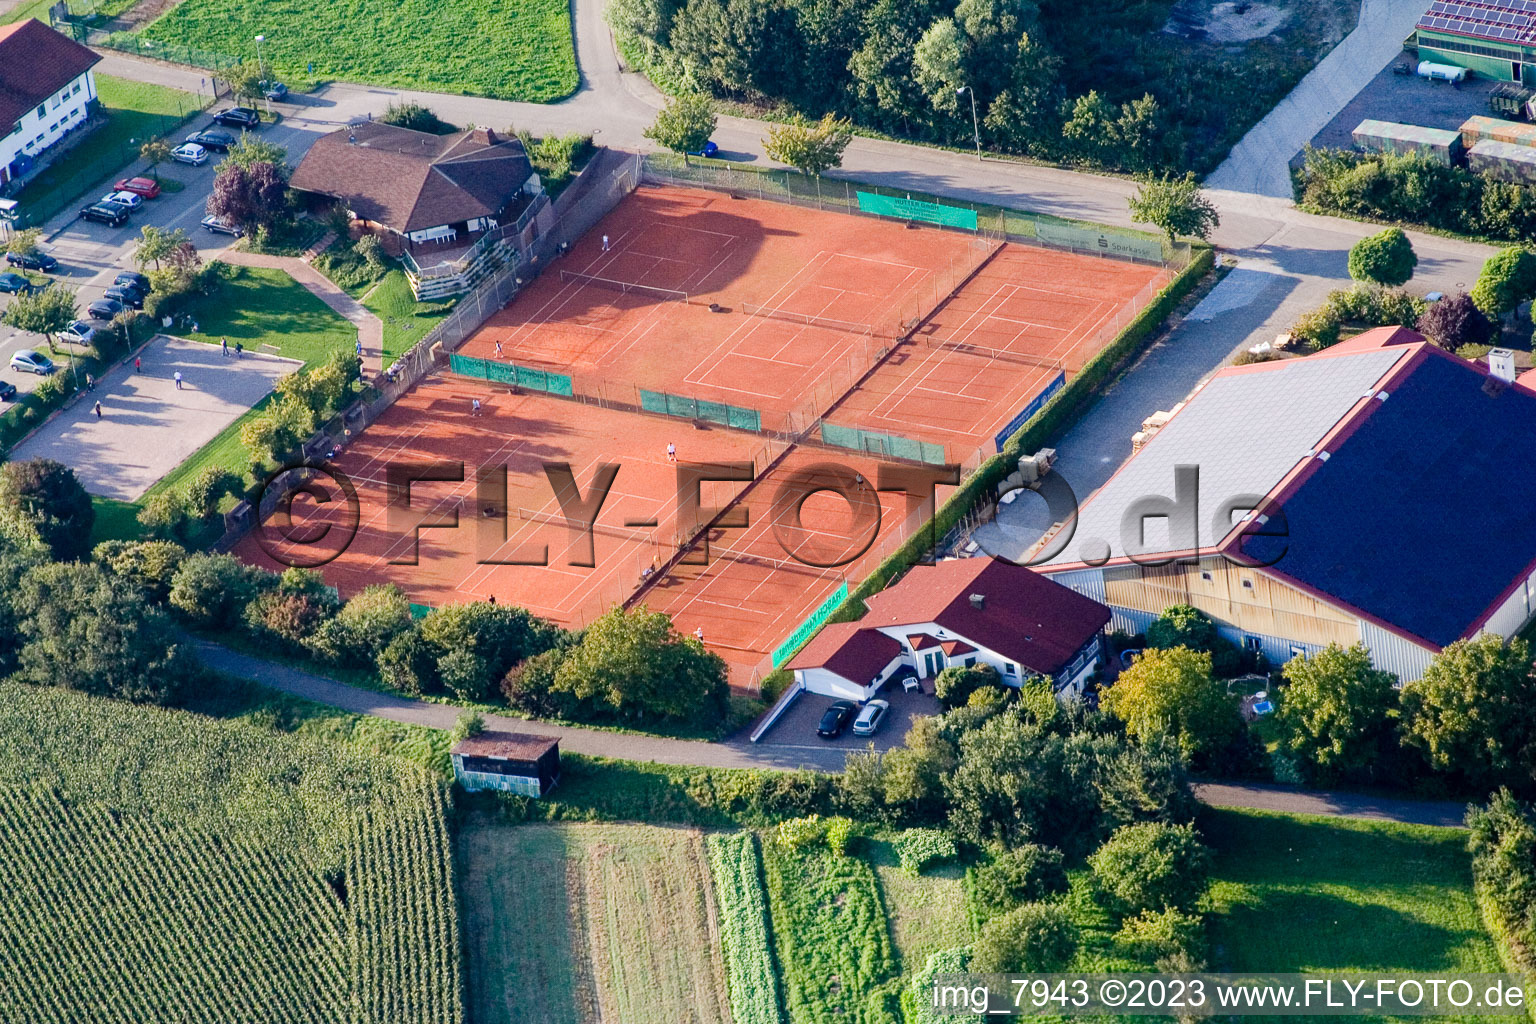 Aerial view of Tennis club in Neuburg in the state Rhineland-Palatinate, Germany